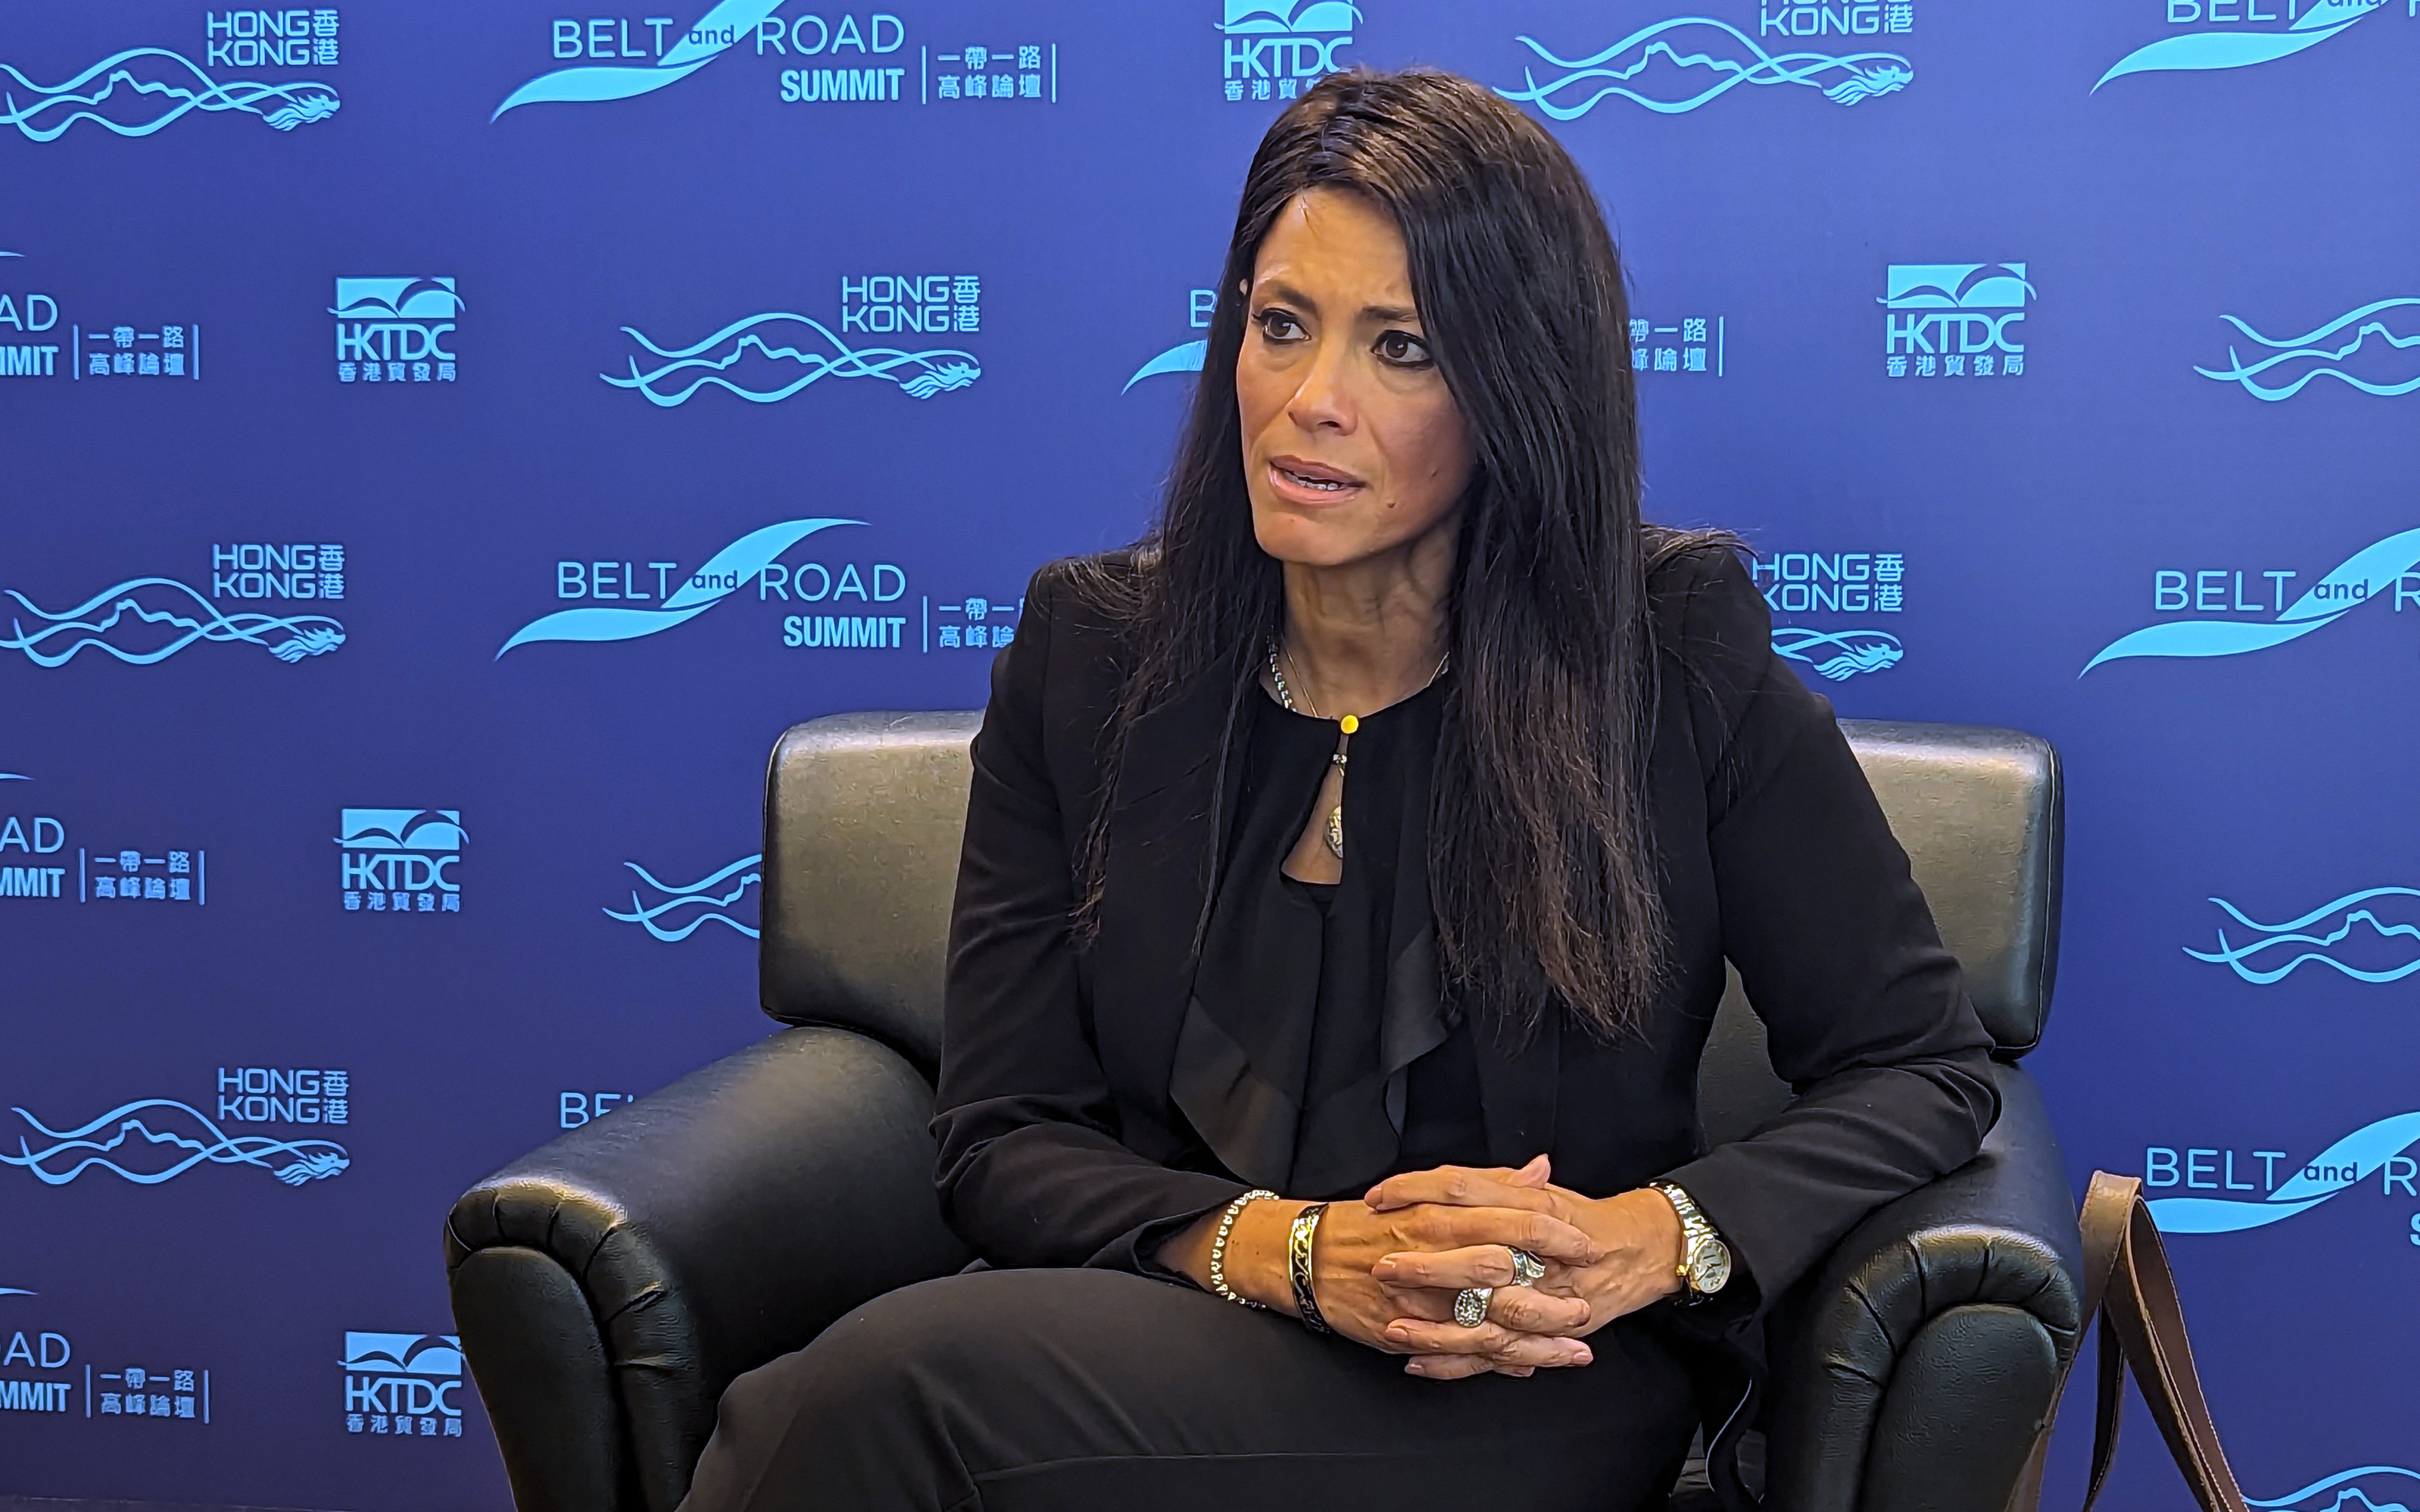 Rania Al-Mashat,  the Egyptian international cooperation minister, at the Belt and Road Summit in Hong Kong. Photo: Handout